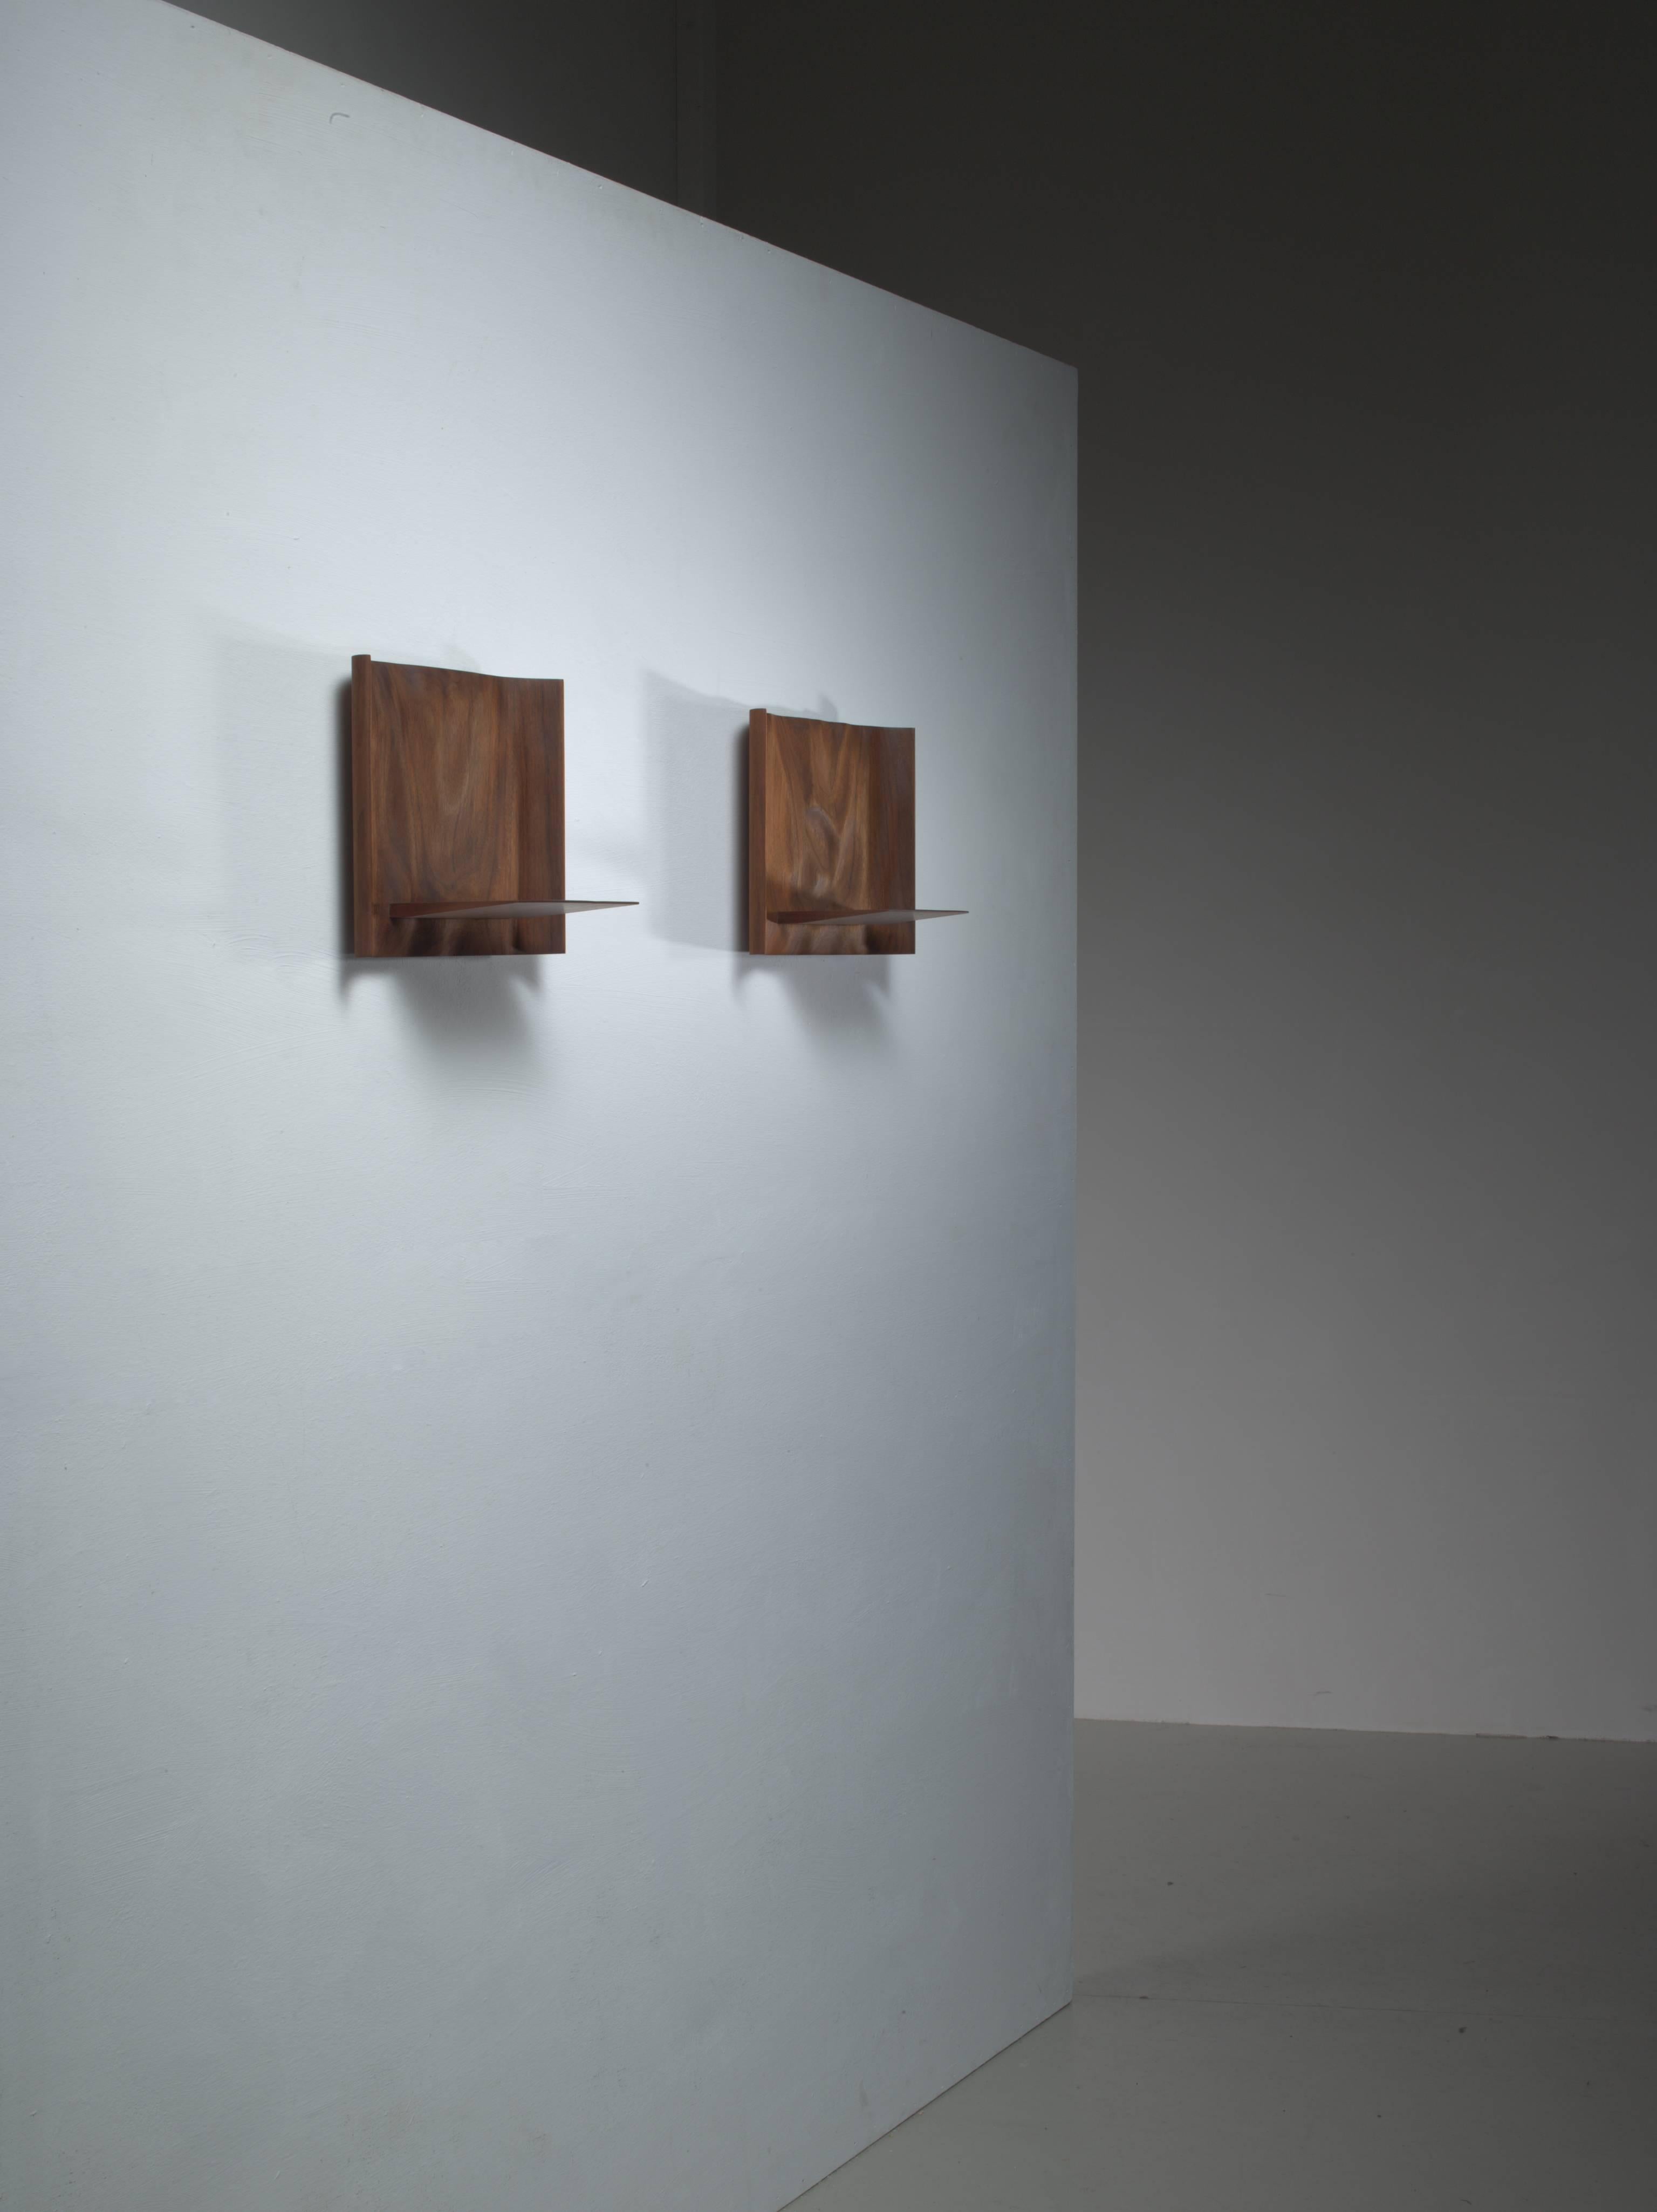 American Craftsman Roger Sloan Pair of Sculptural Walnut Wall Shelves, USA, 1970s For Sale